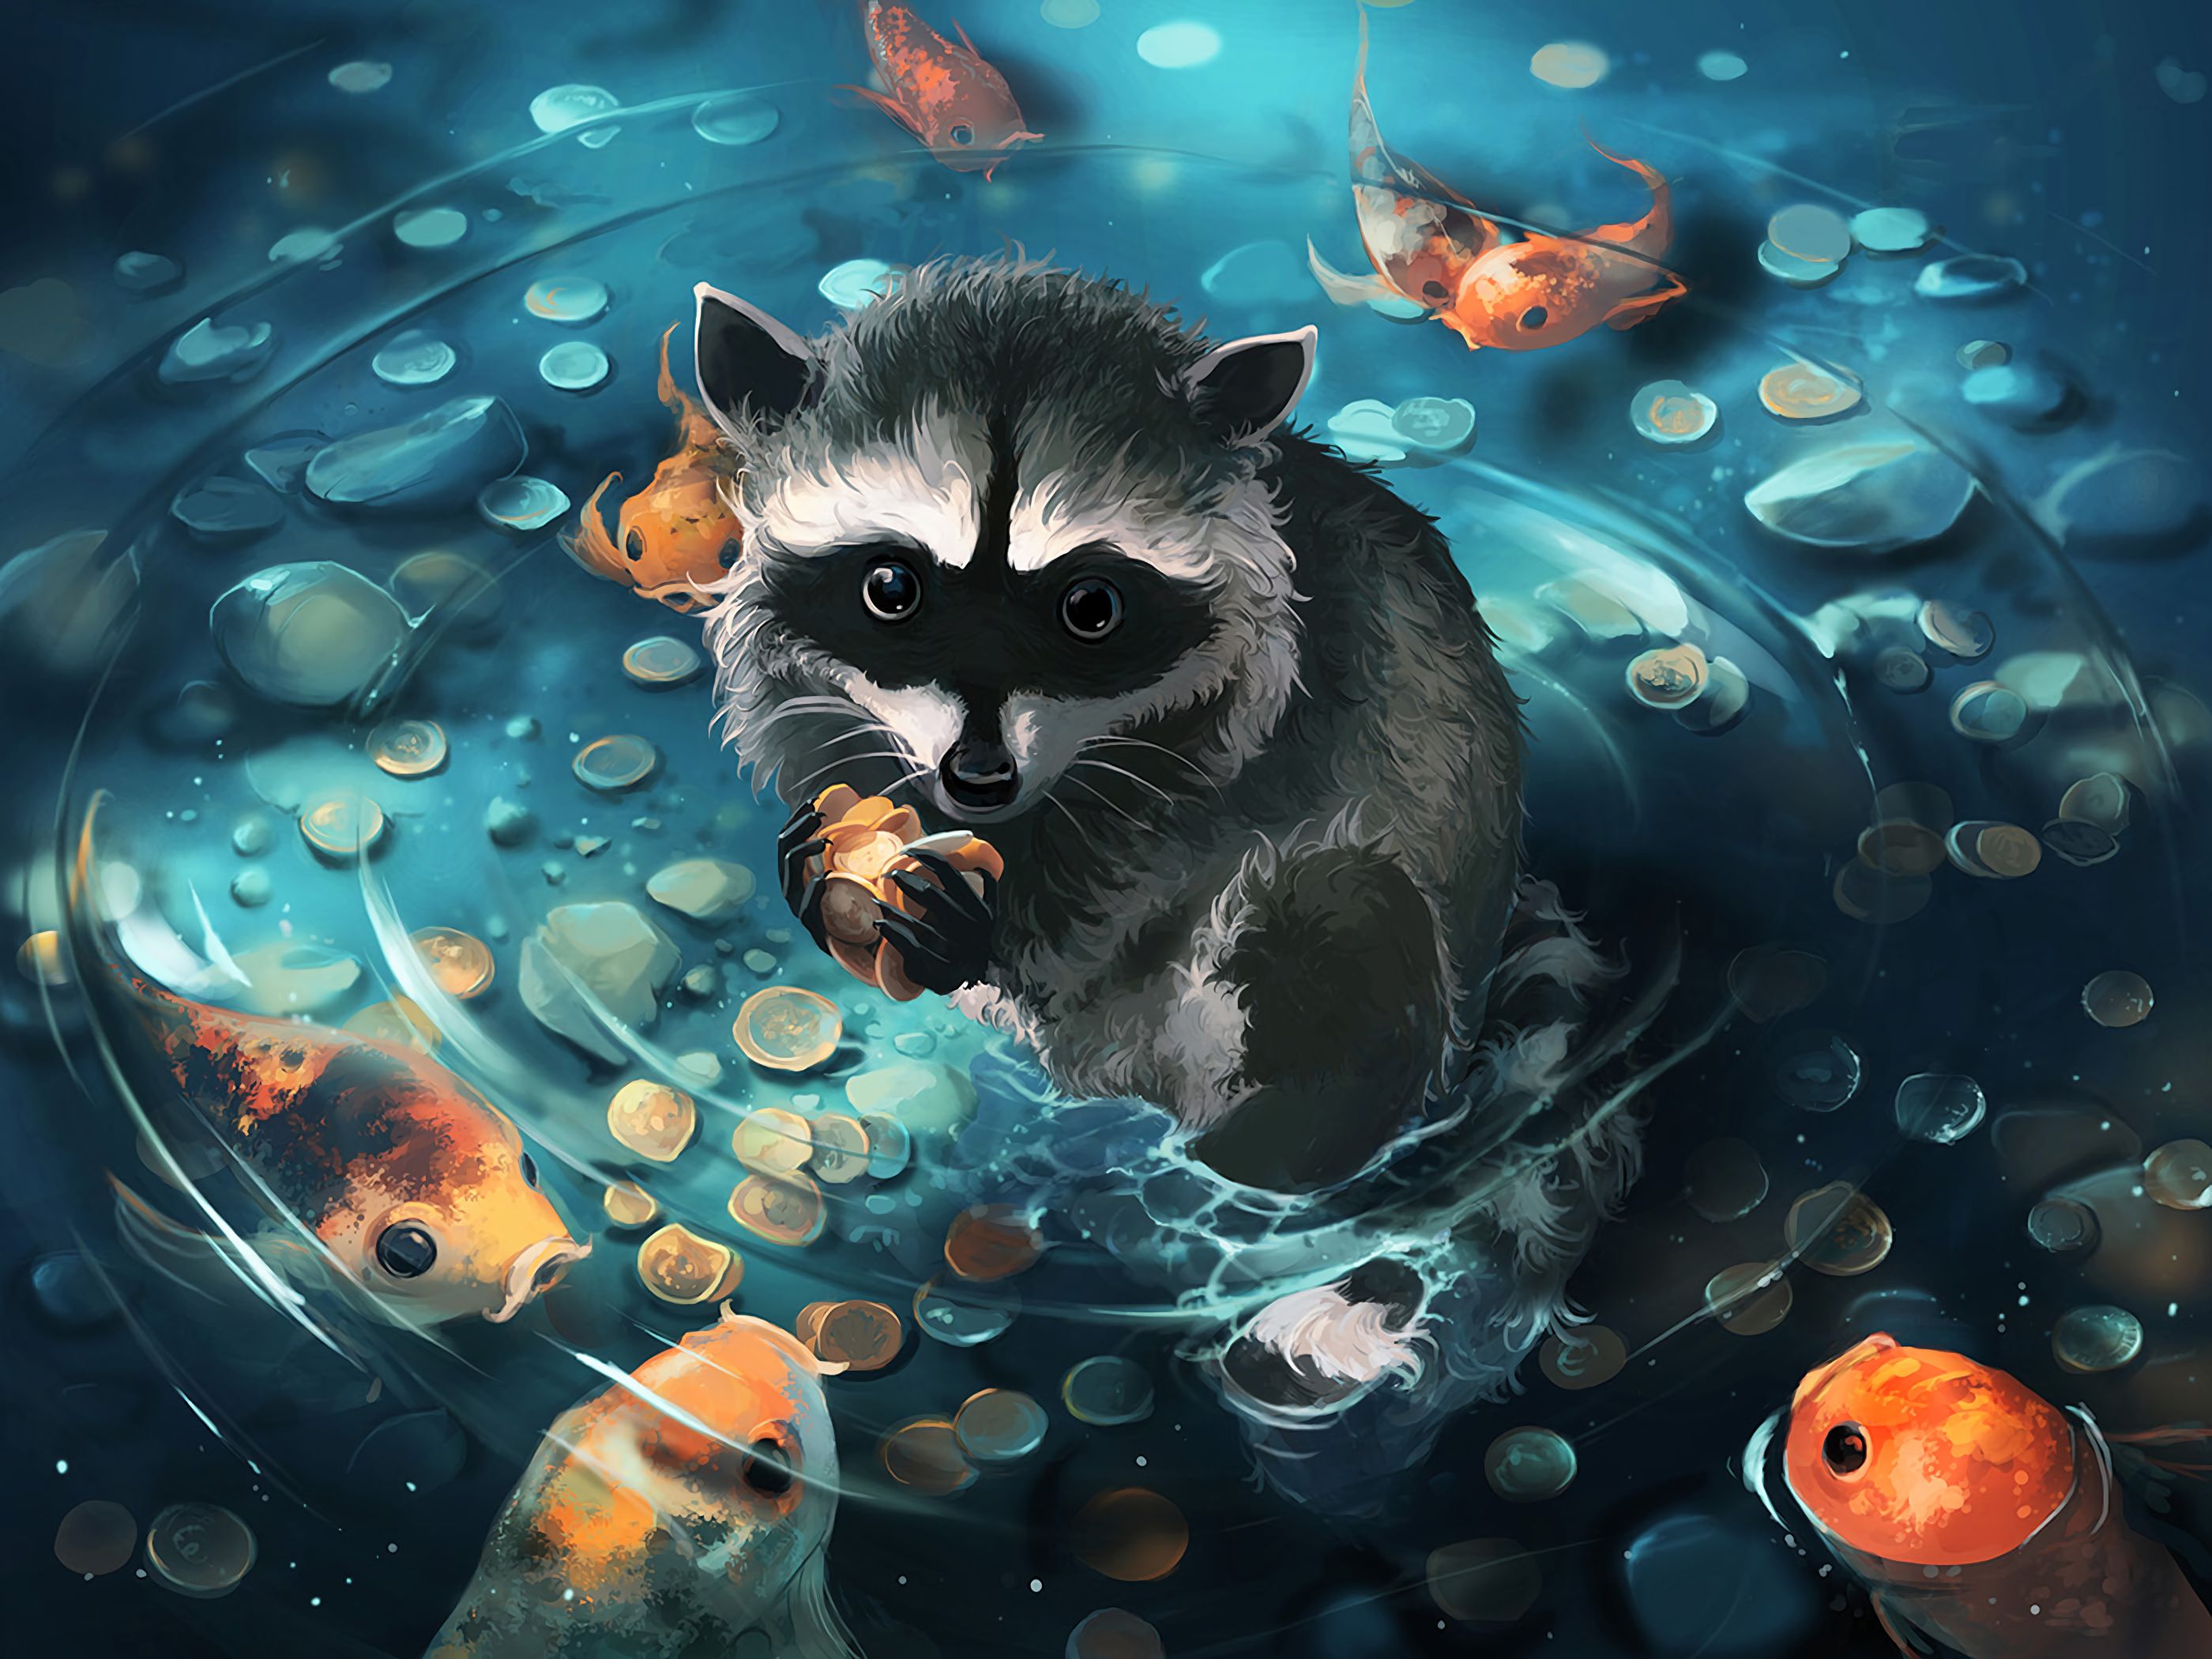 79792 download wallpaper art, water, raccoon, coins screensavers and pictures for free